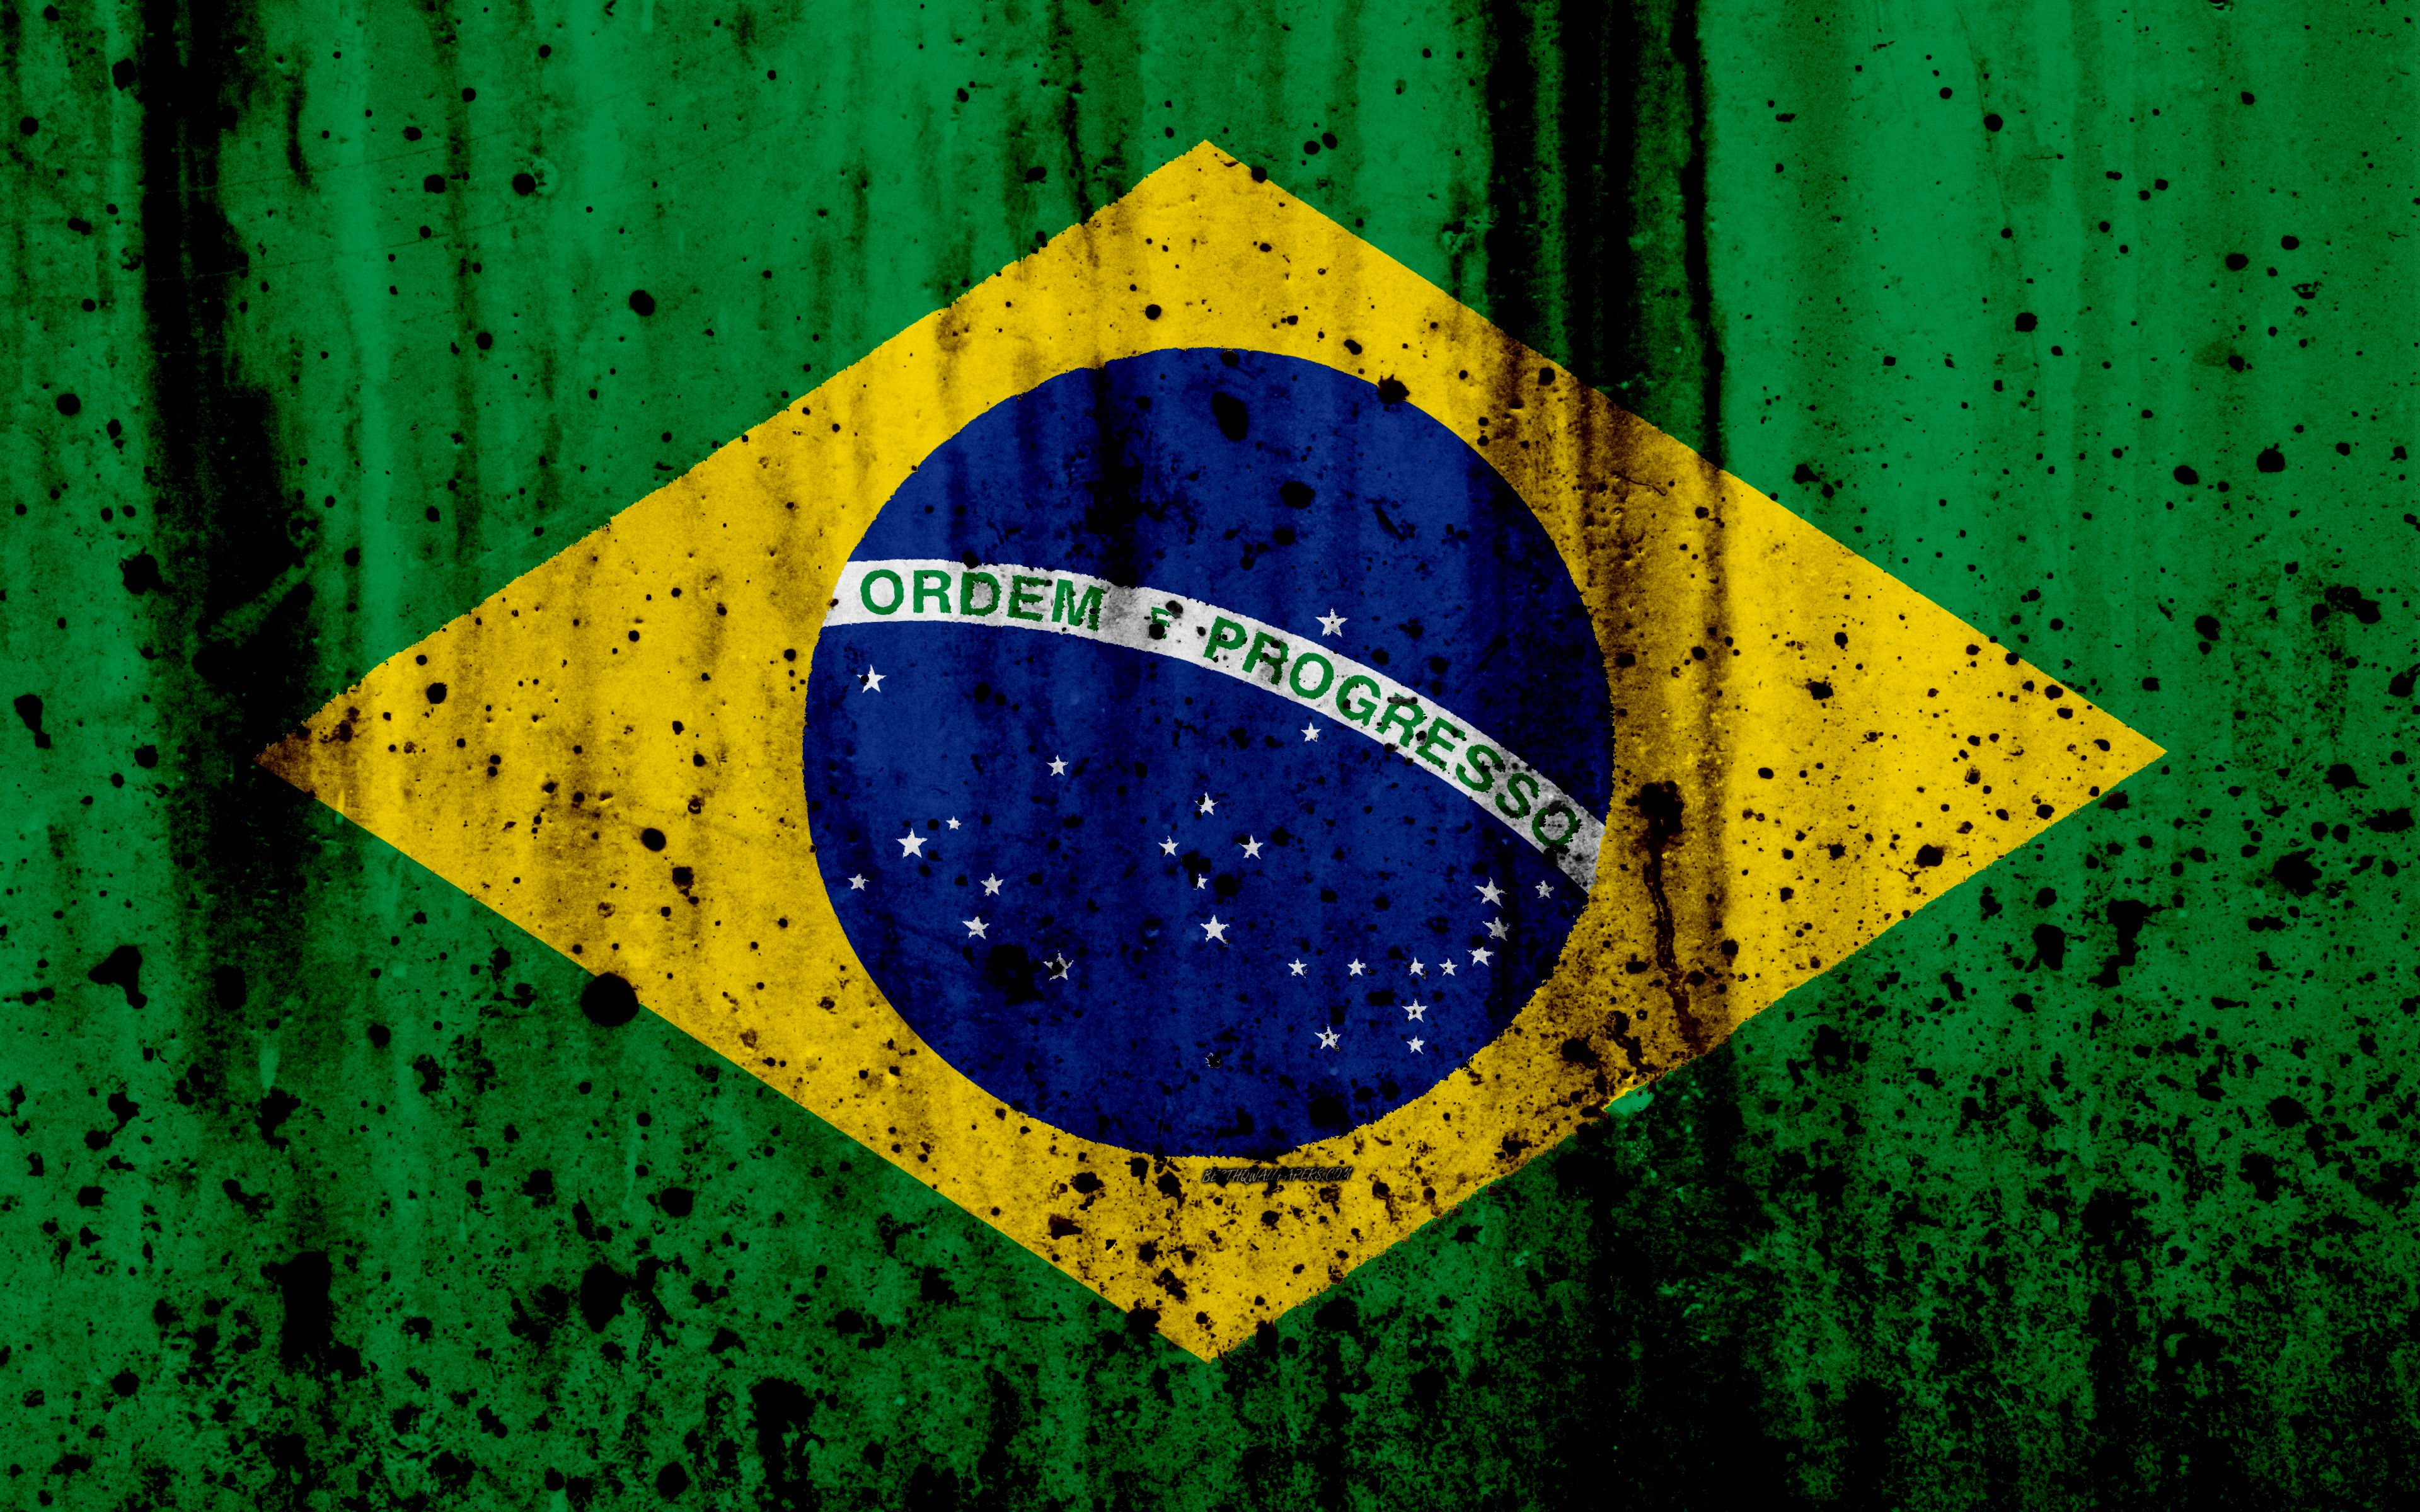 Download wallpaper Brazilian flag, 4k, grunge, South America, flag of Brazil, national symbols, Brazil, coat of arms of Brazil, Brazilian national emblem for desktop with resolution 3840x2400. High Quality HD picture wallpaper